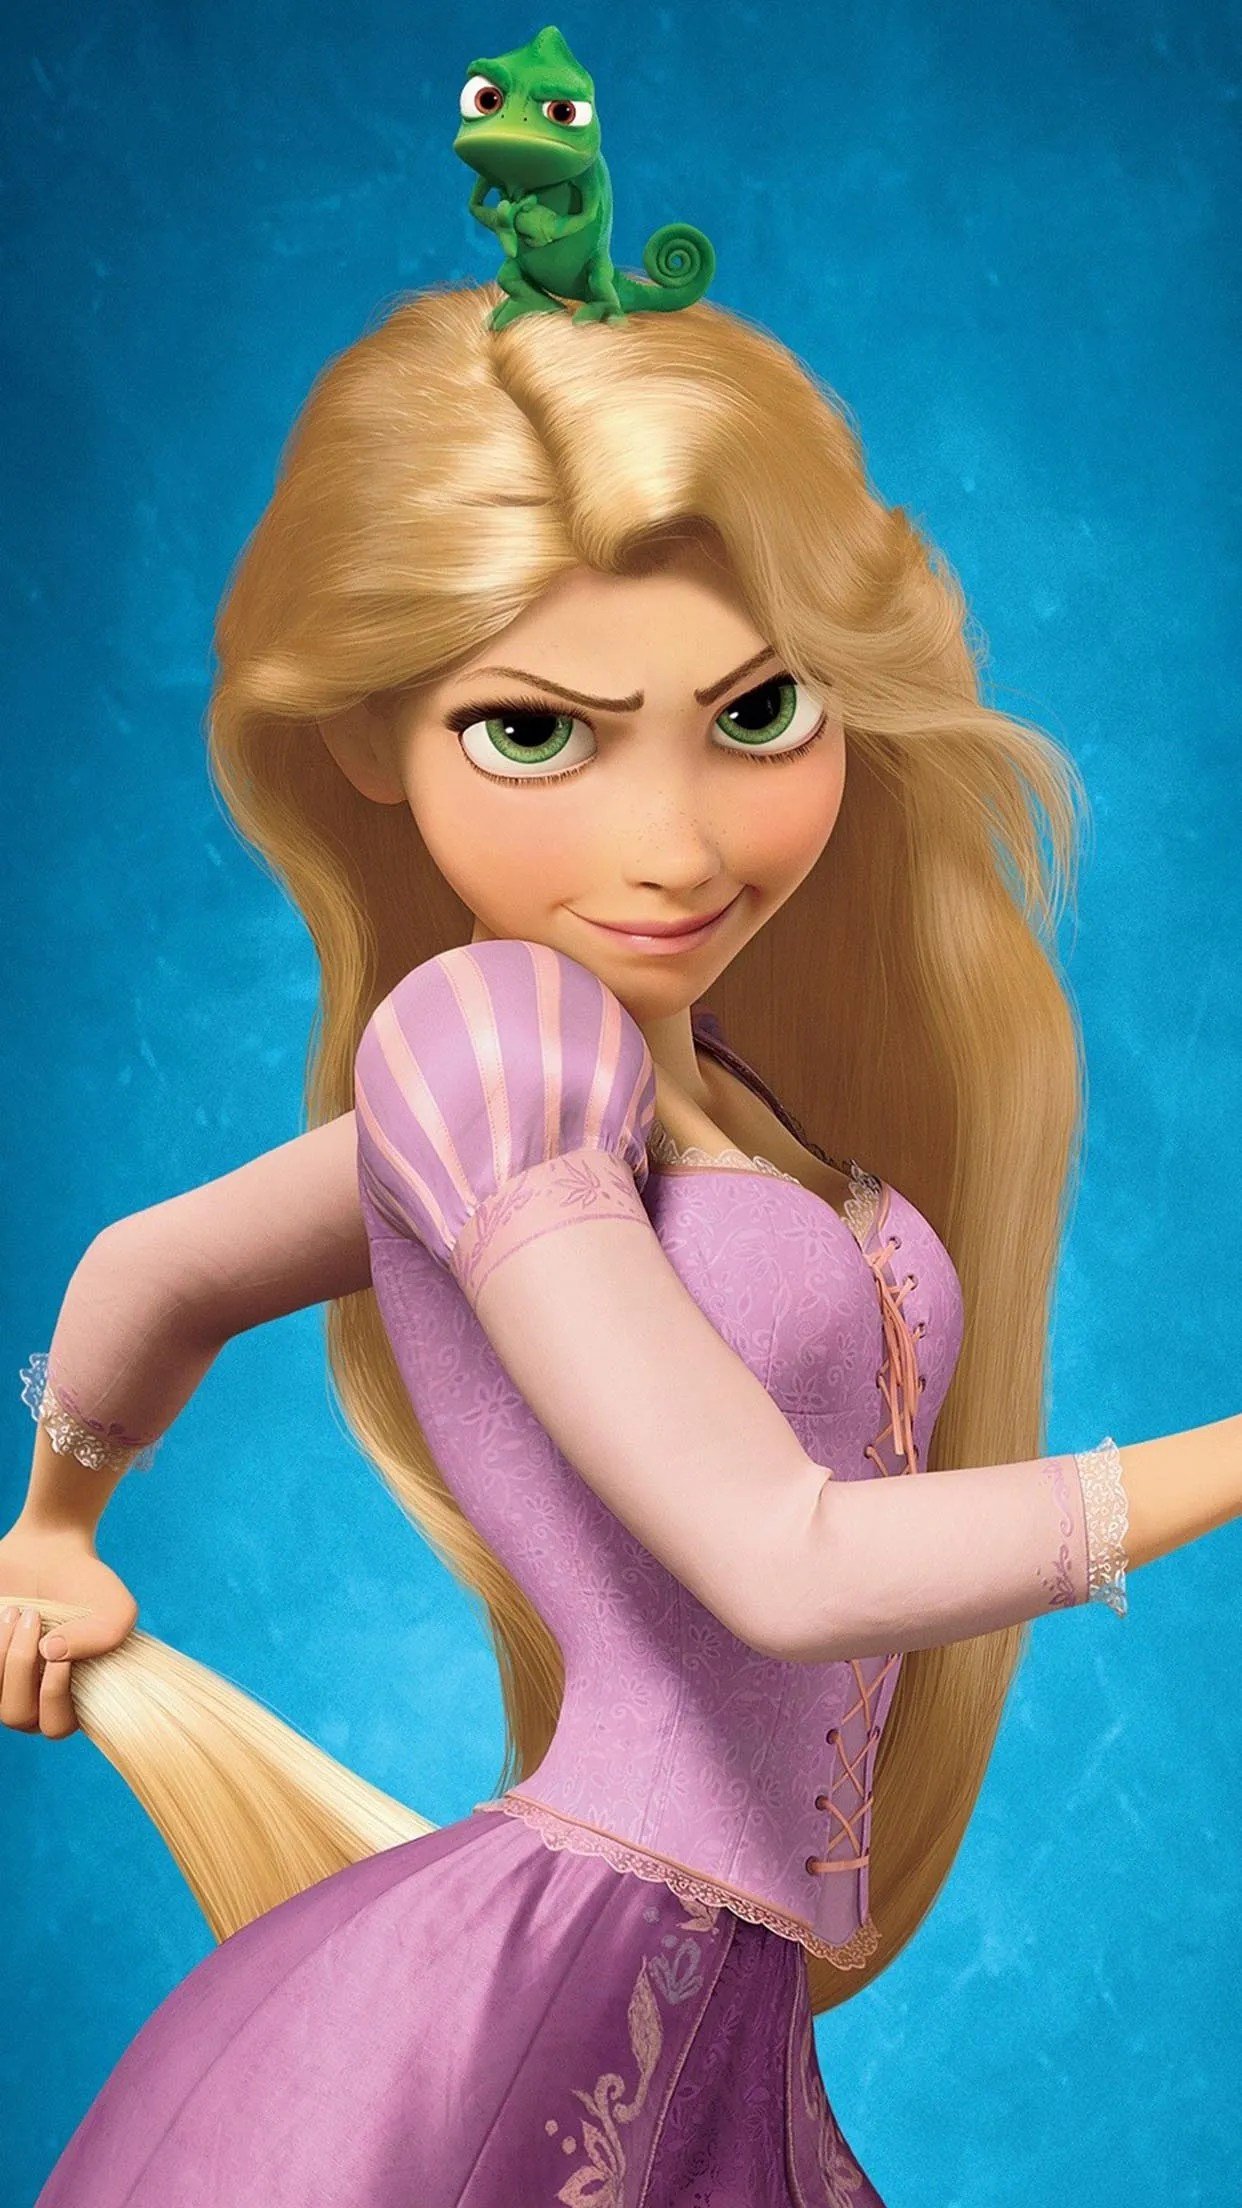 Tangled: Rapunzel Wallpaper for iPhone Pro Max, X, 6